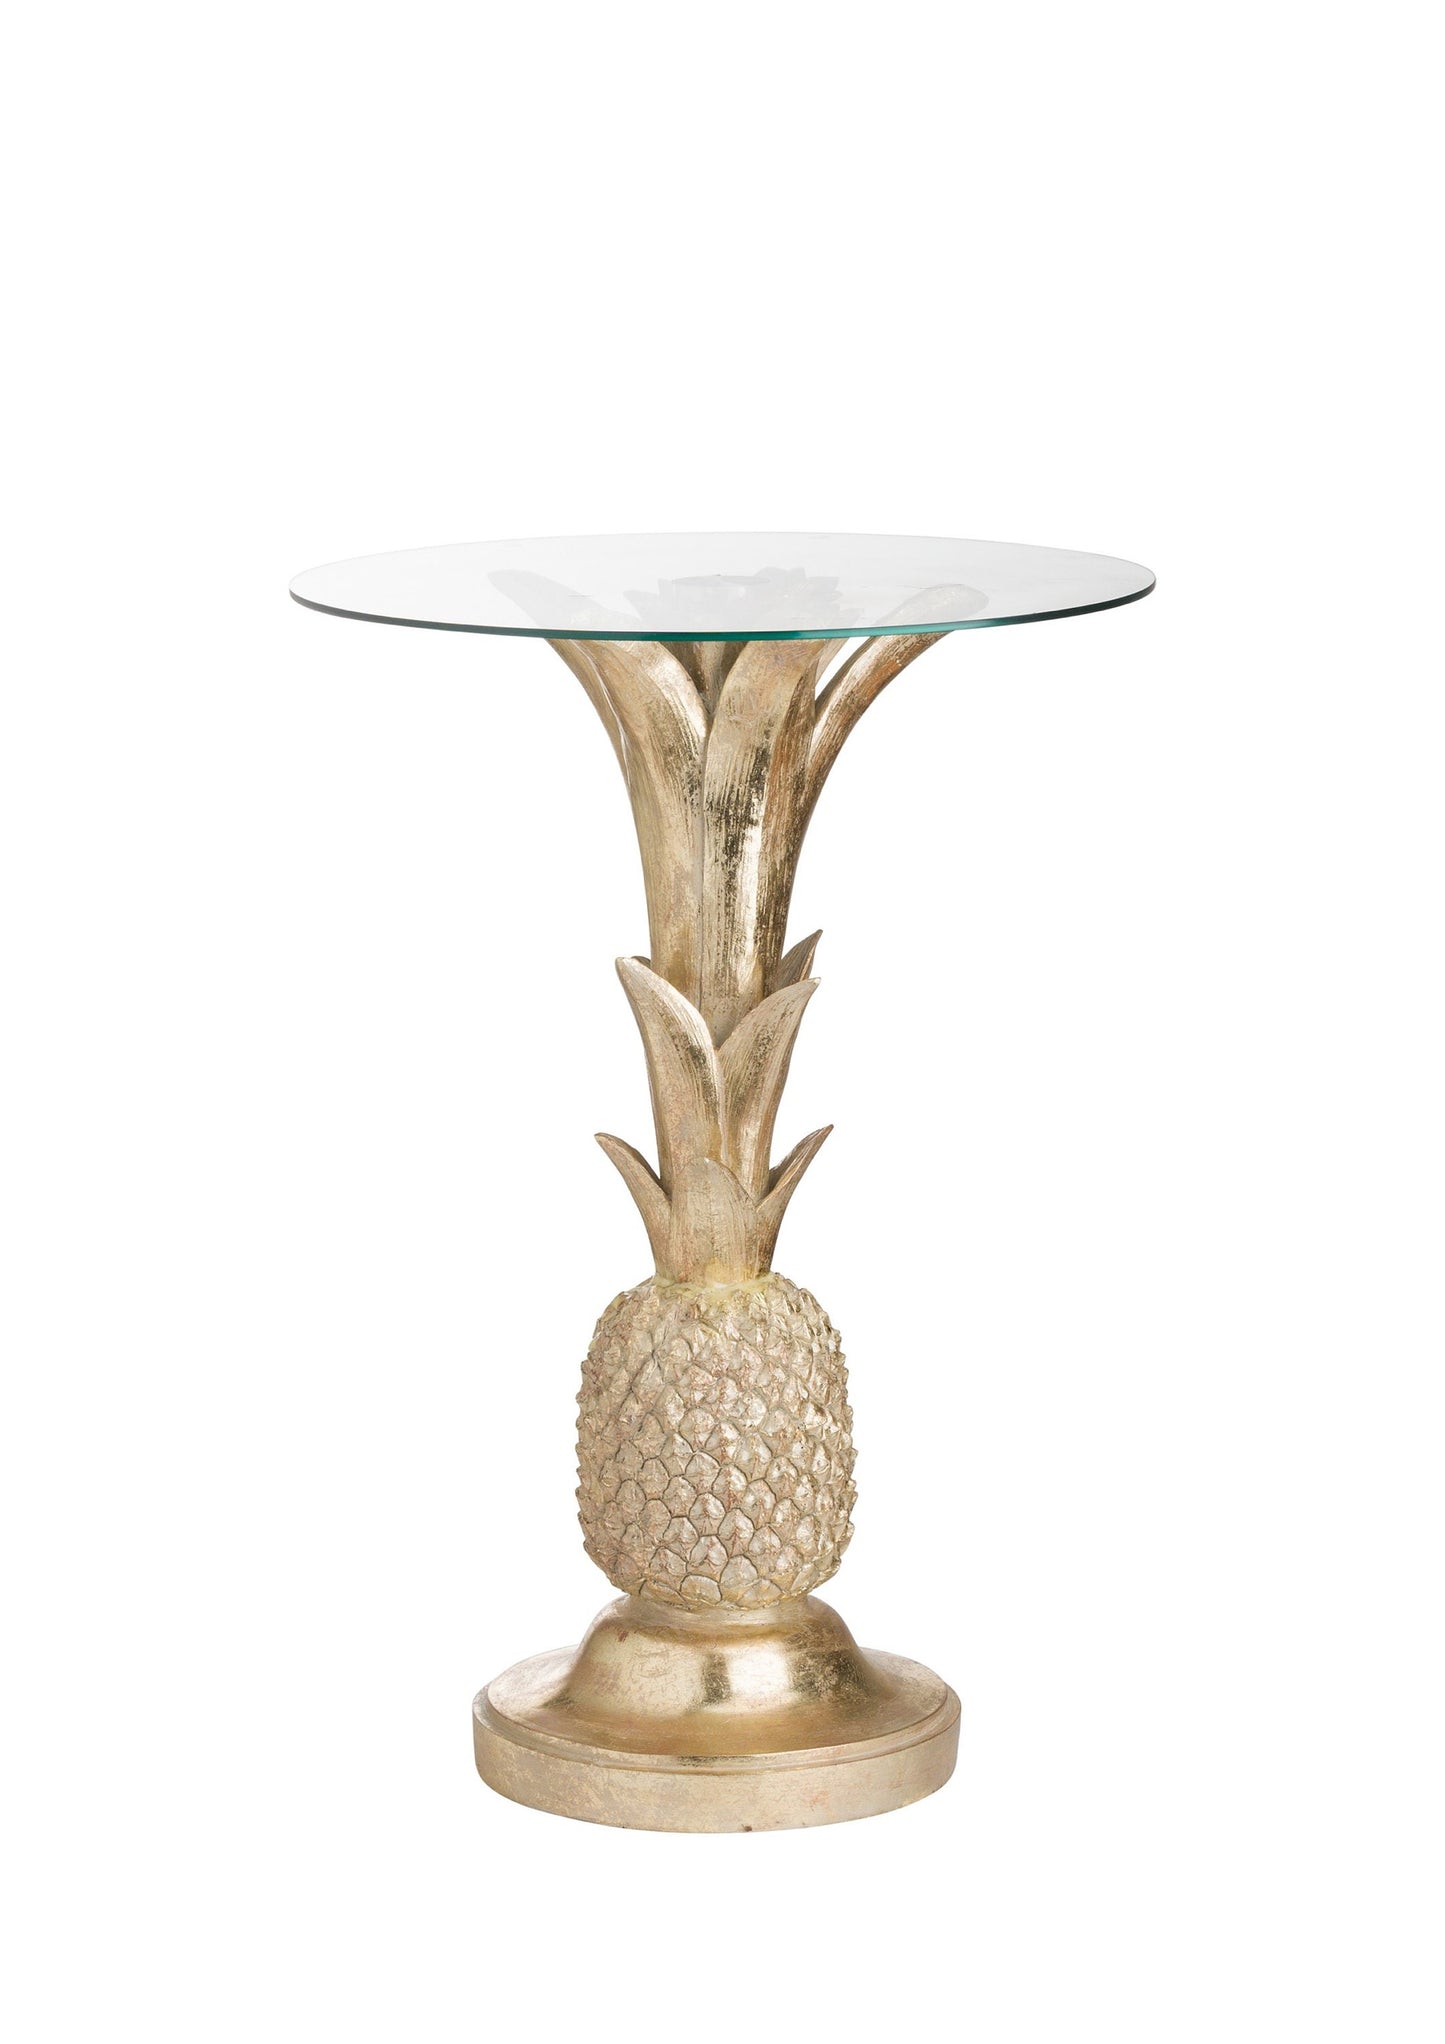 Gold Pineapple Side Table Pre Order for late February